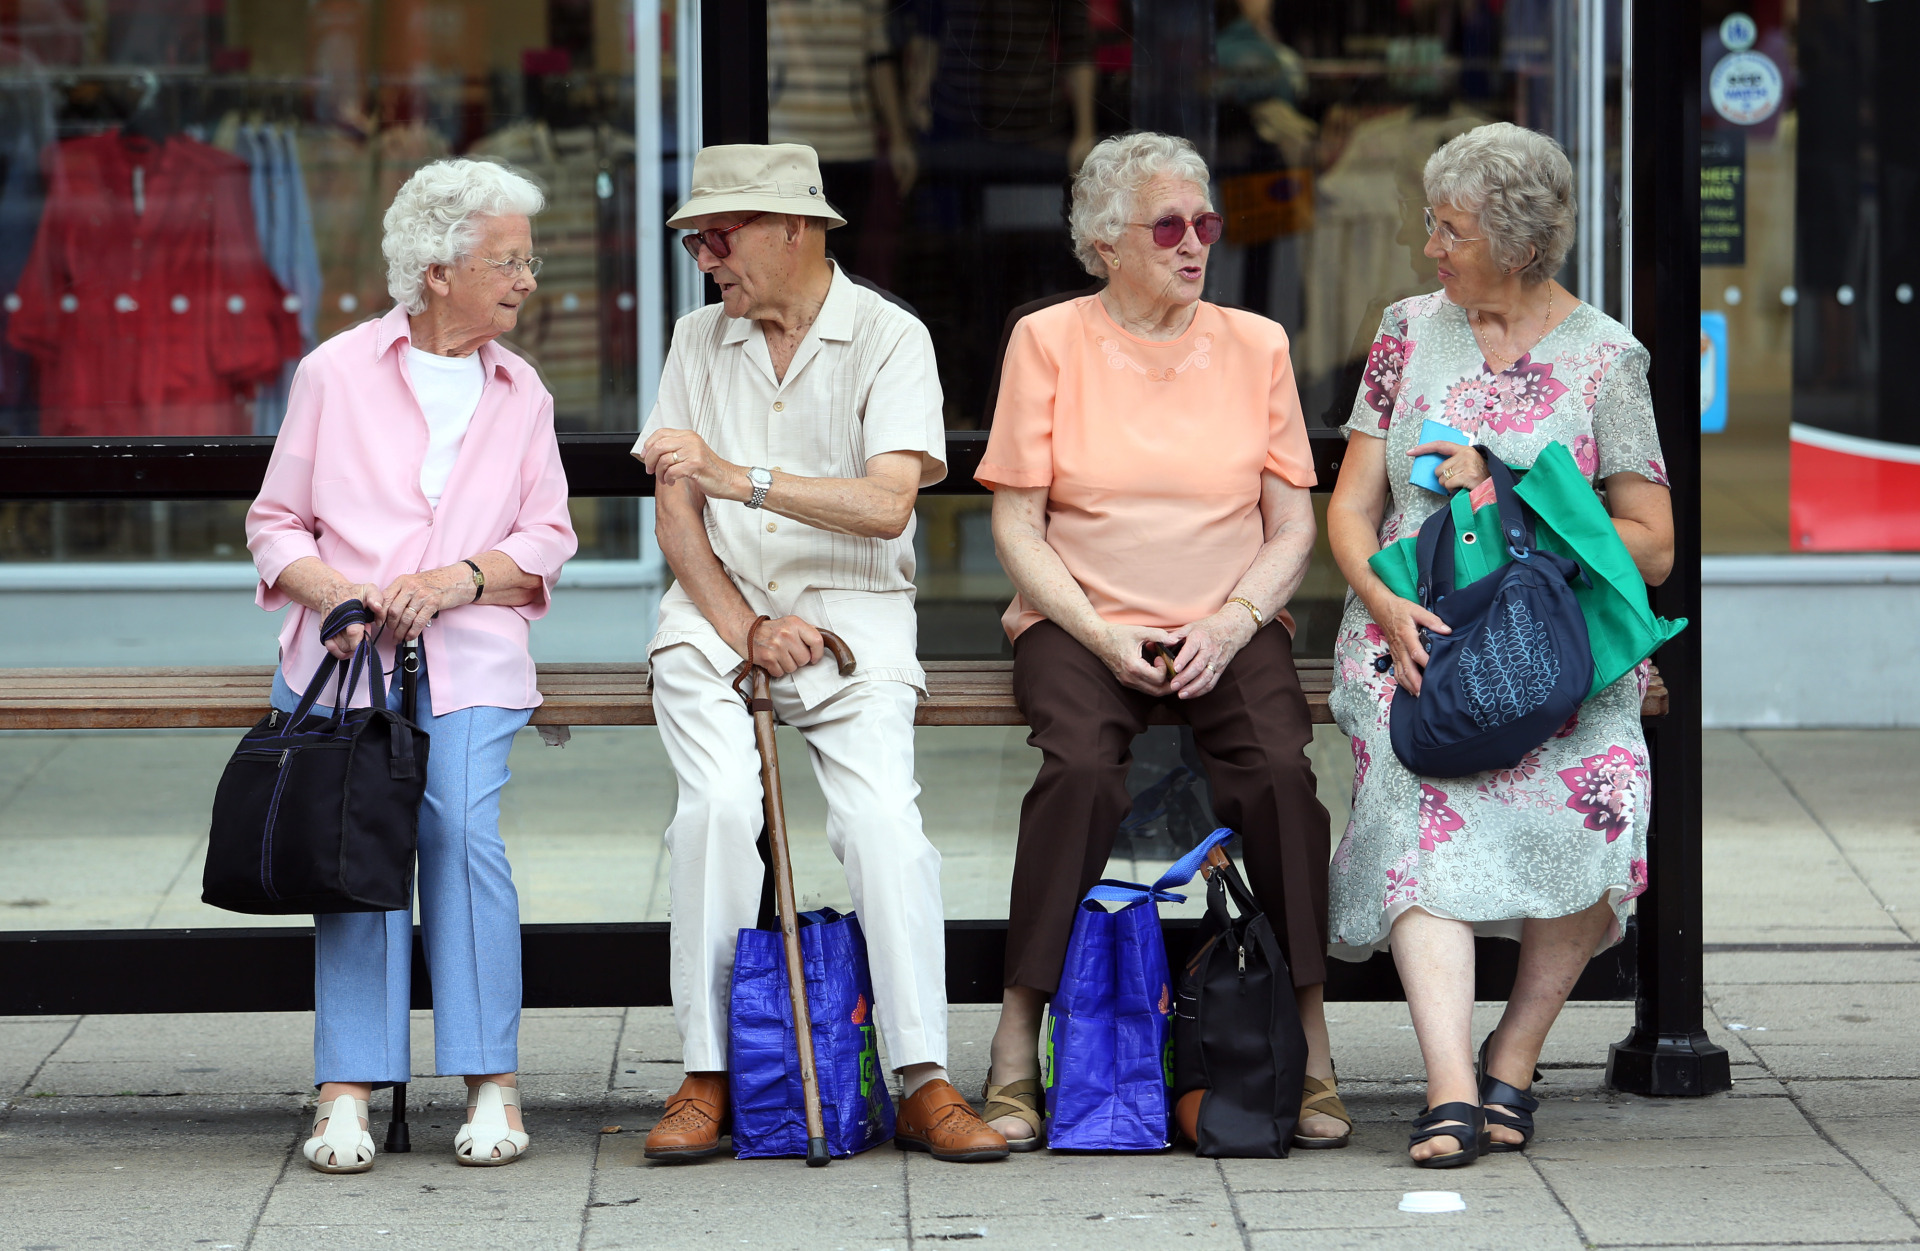 Elderly people sit with their shopping bags as they wait for transportation at a bus stop in Hastings, UK, on Tues., July 23, 2013.